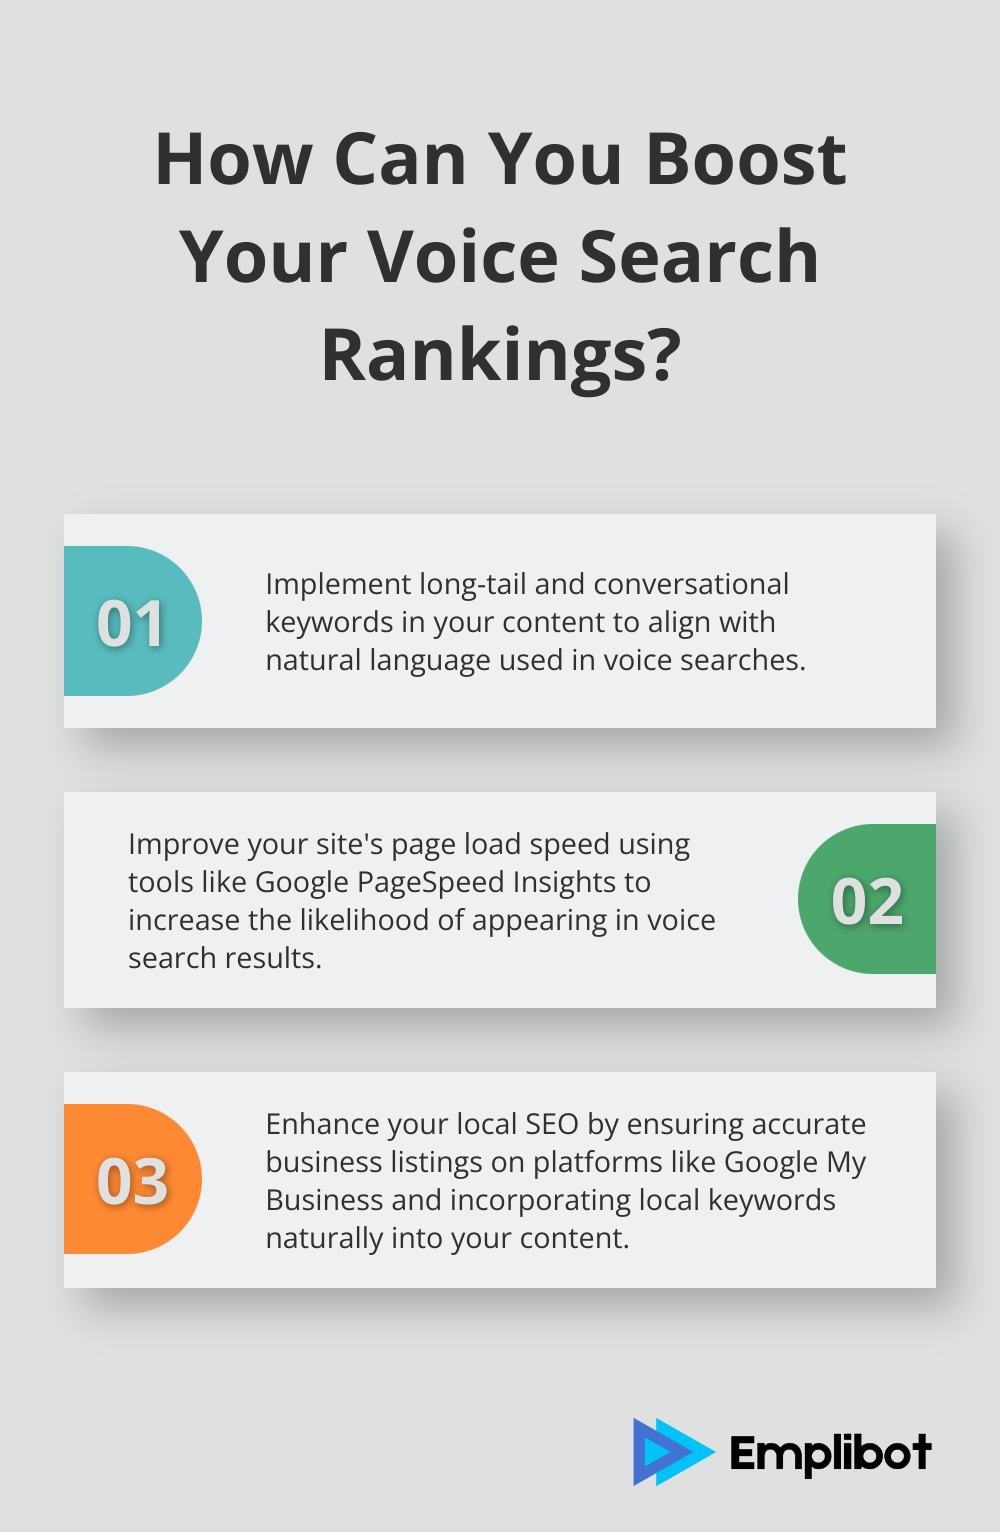 Fact - How Can You Boost Your Voice Search Rankings?